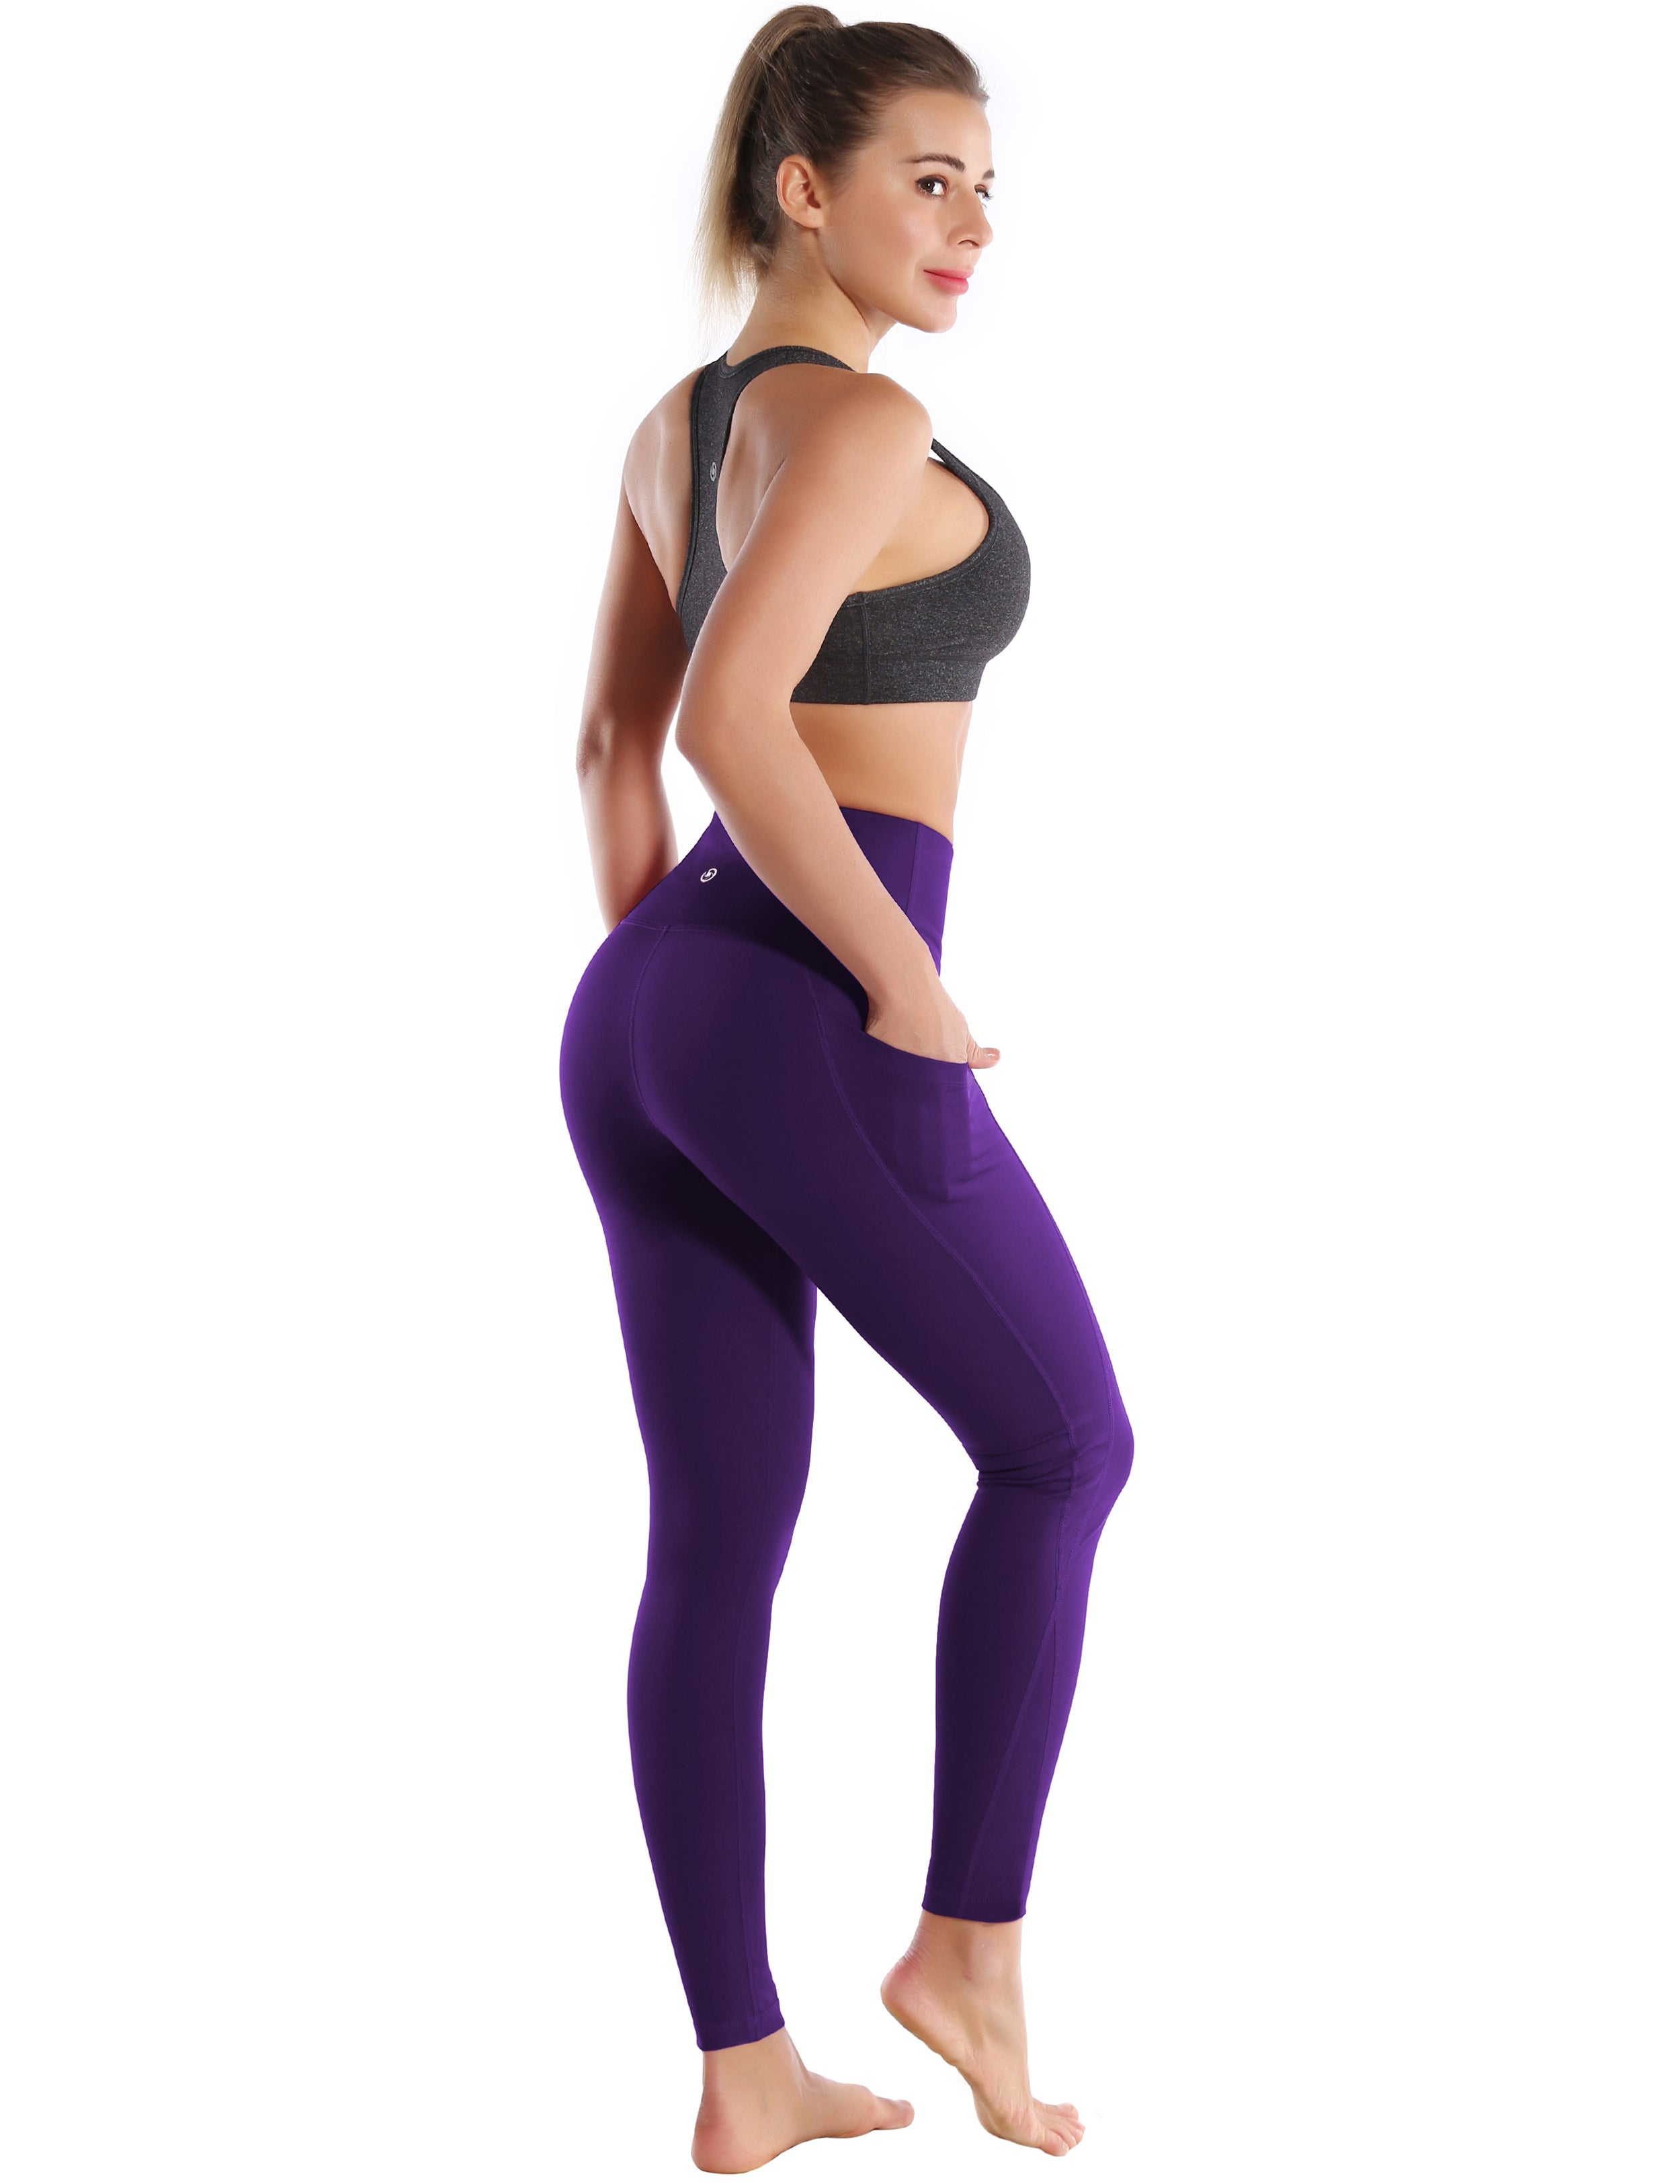 High Waist Side Pockets Jogging Pants eggplantpurple 75% Nylon, 25% Spandex Fabric doesn't attract lint easily 4-way stretch No see-through Moisture-wicking Tummy control Inner pocket